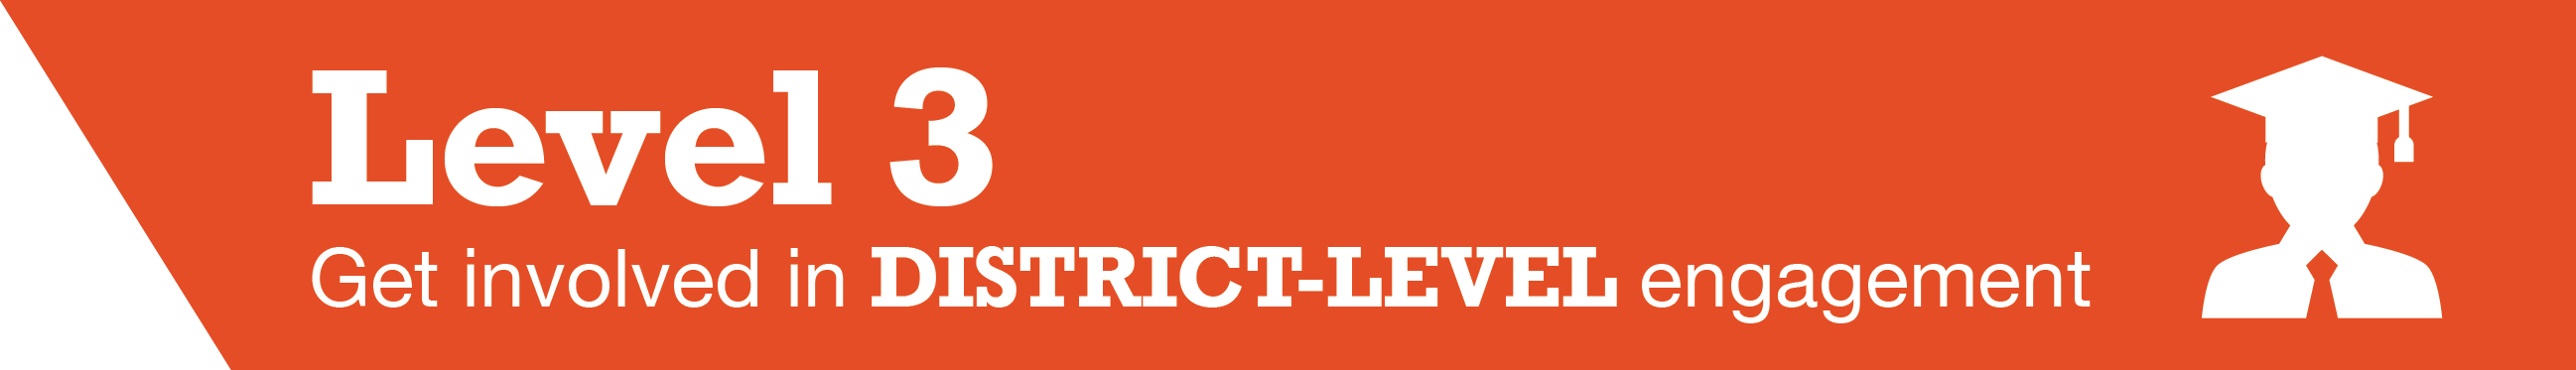 level 3 - get involved in district-level engagement